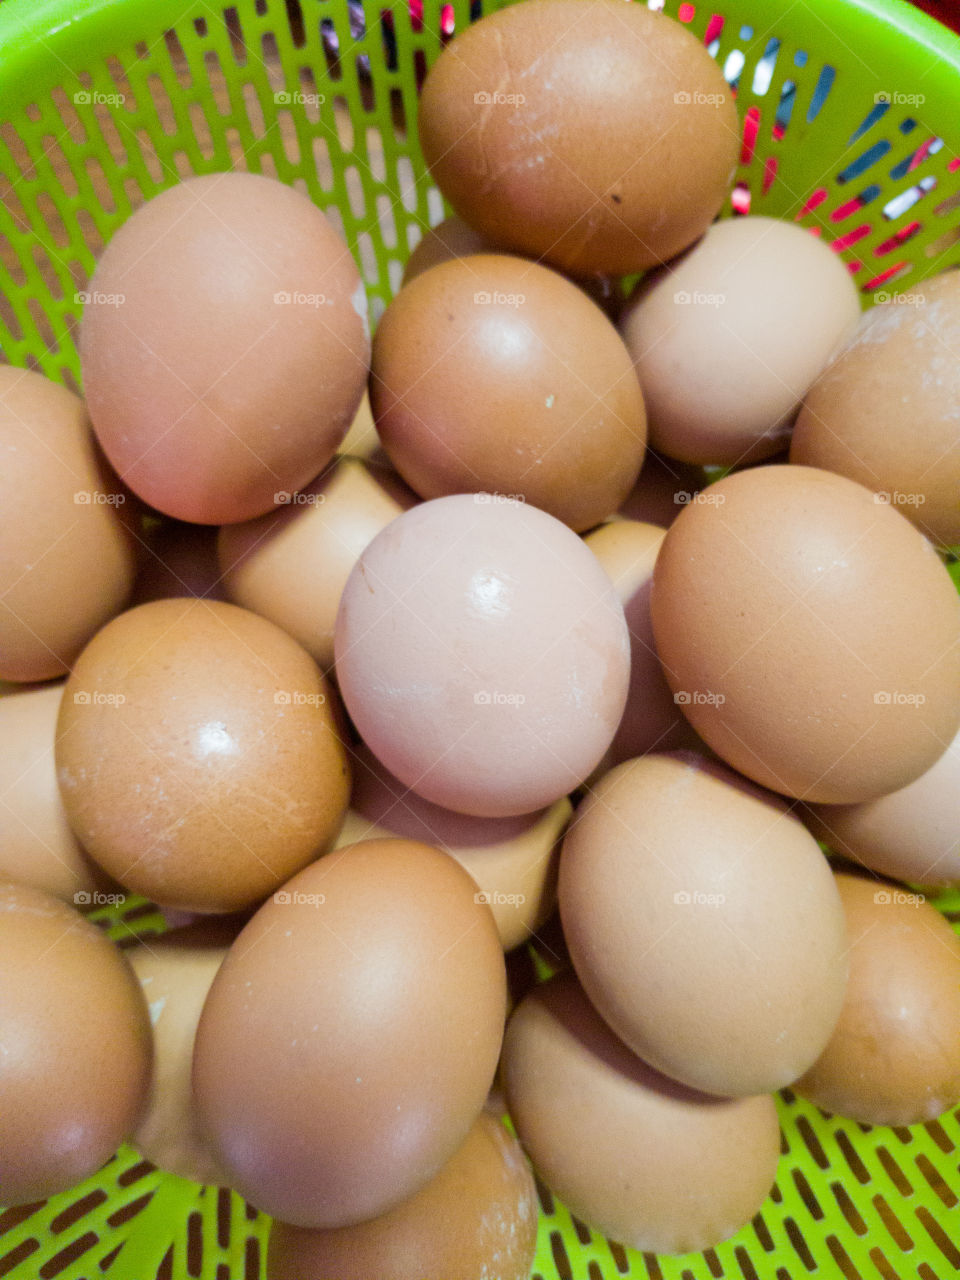 Eggs in a plastic basket